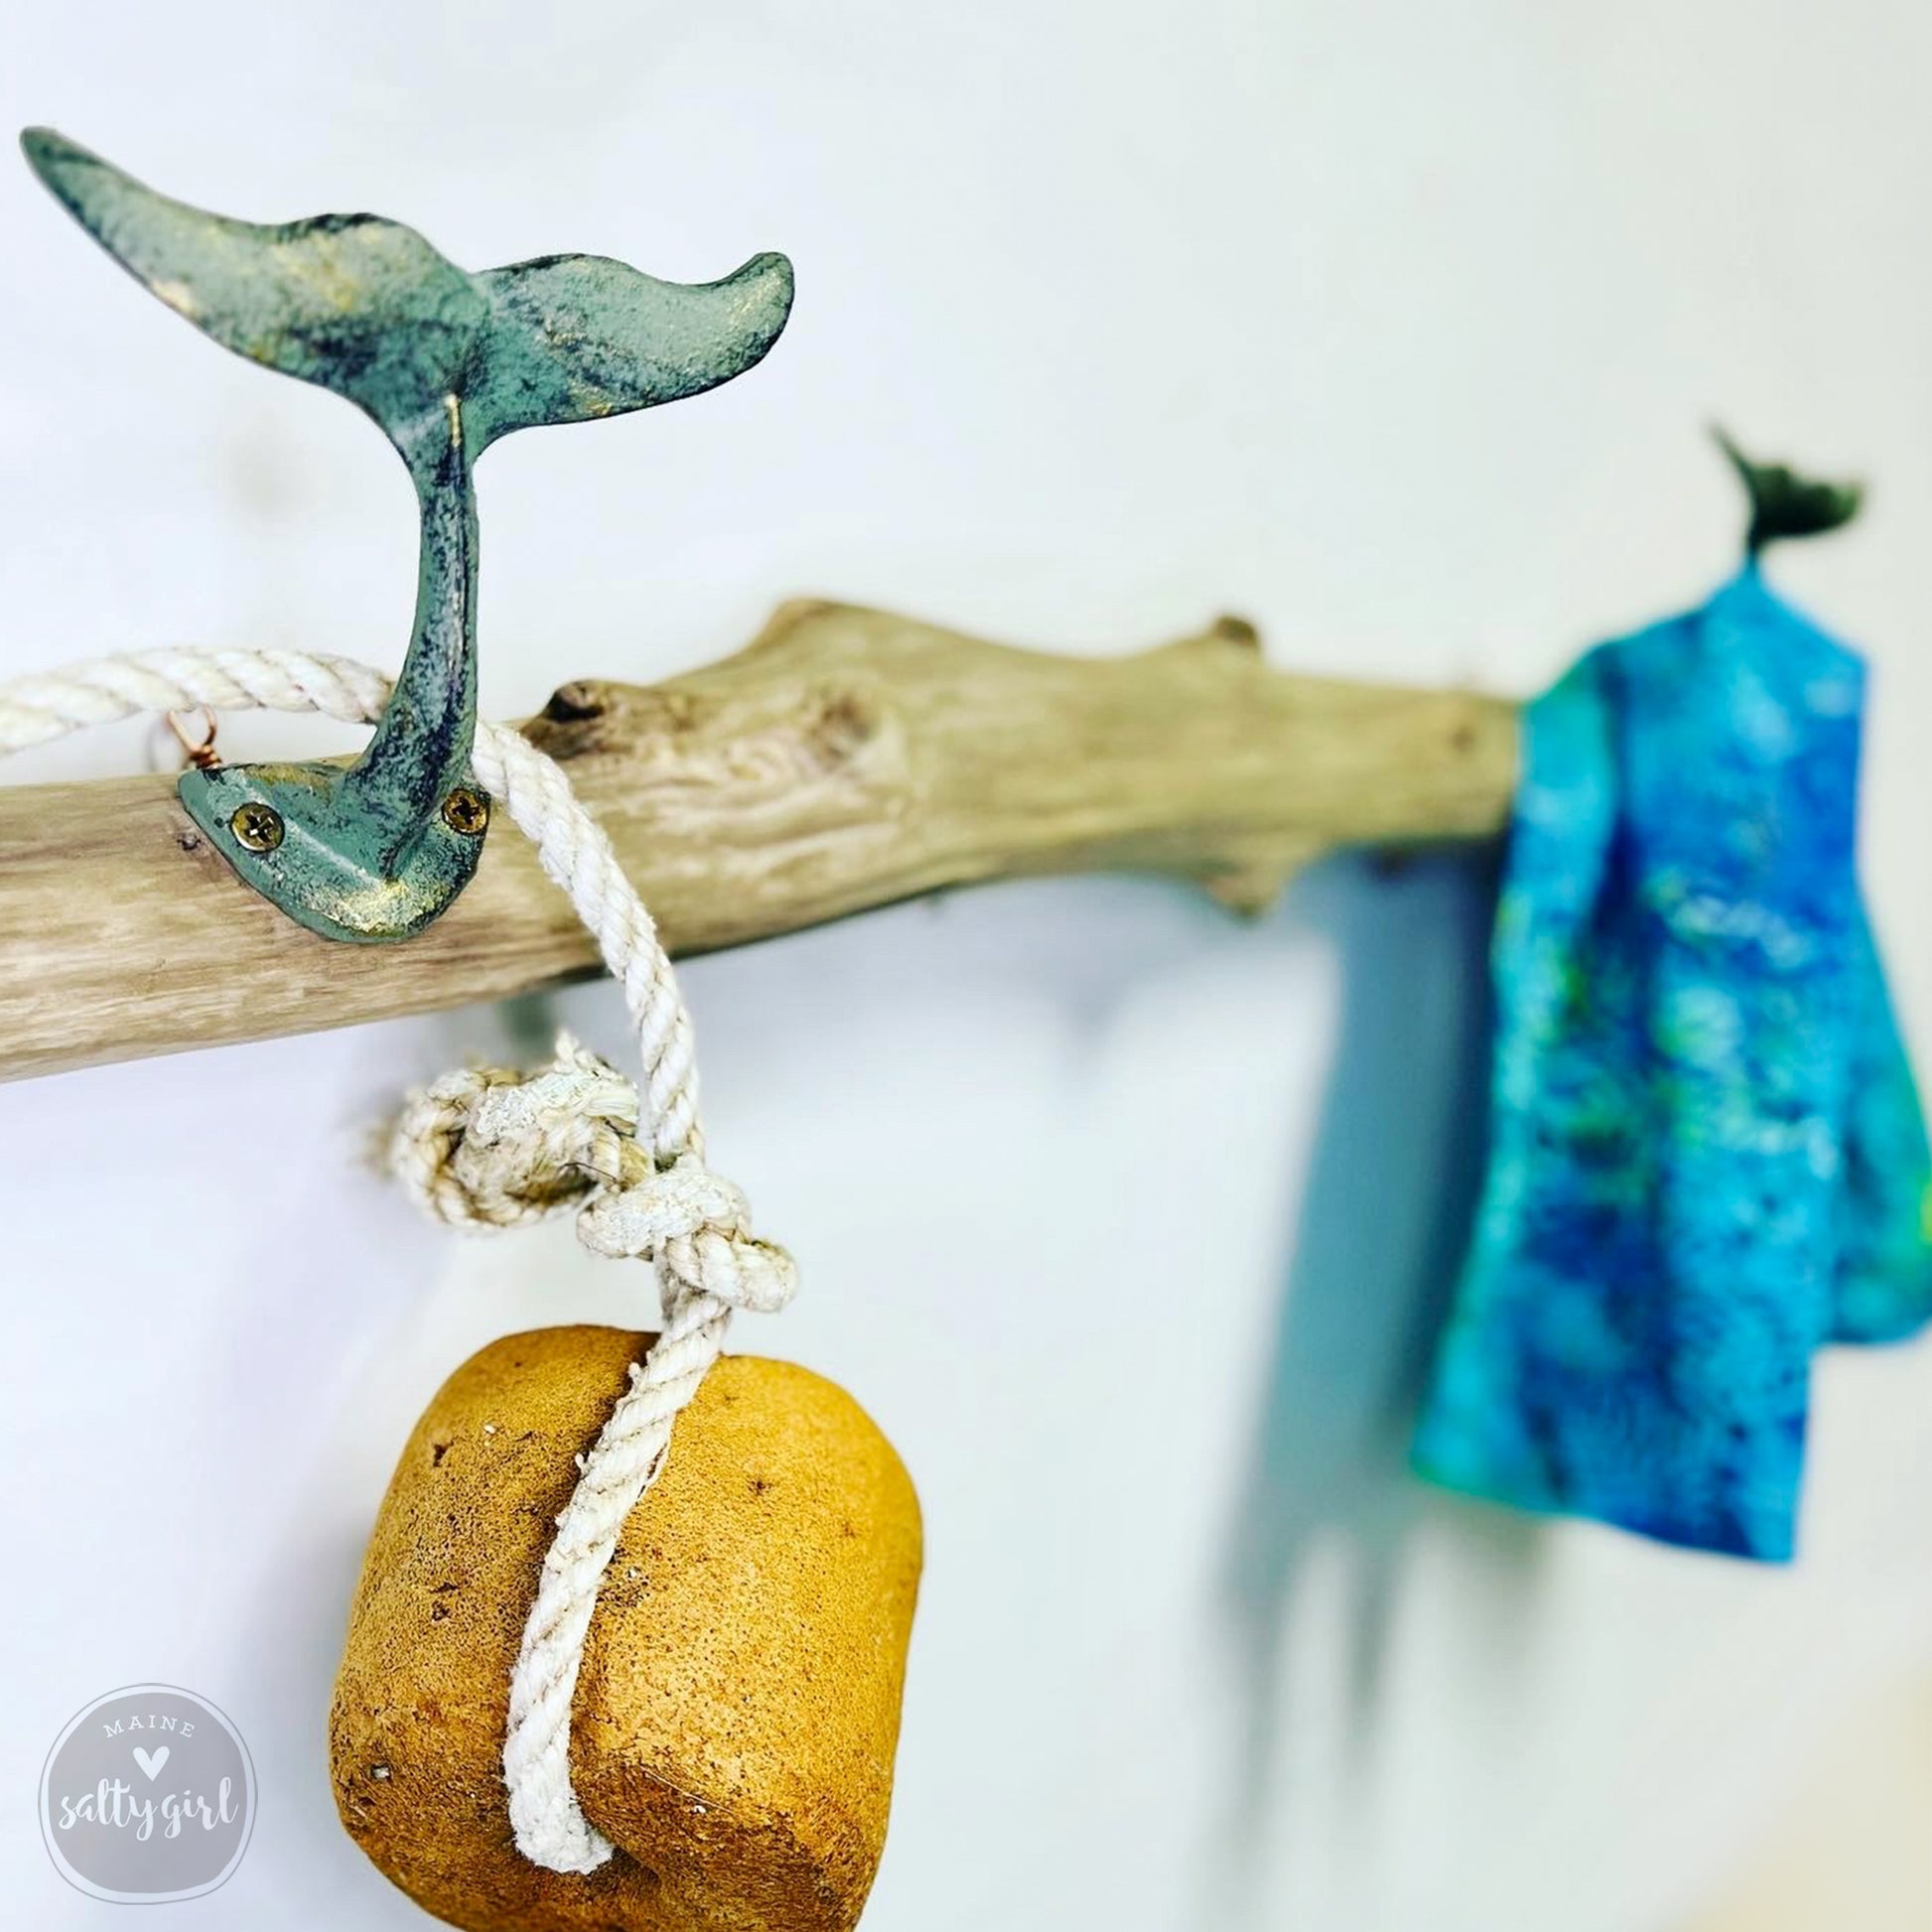 Driftwood Whale Tail Towel Rack 2-4 FT – Maine Salty Girl